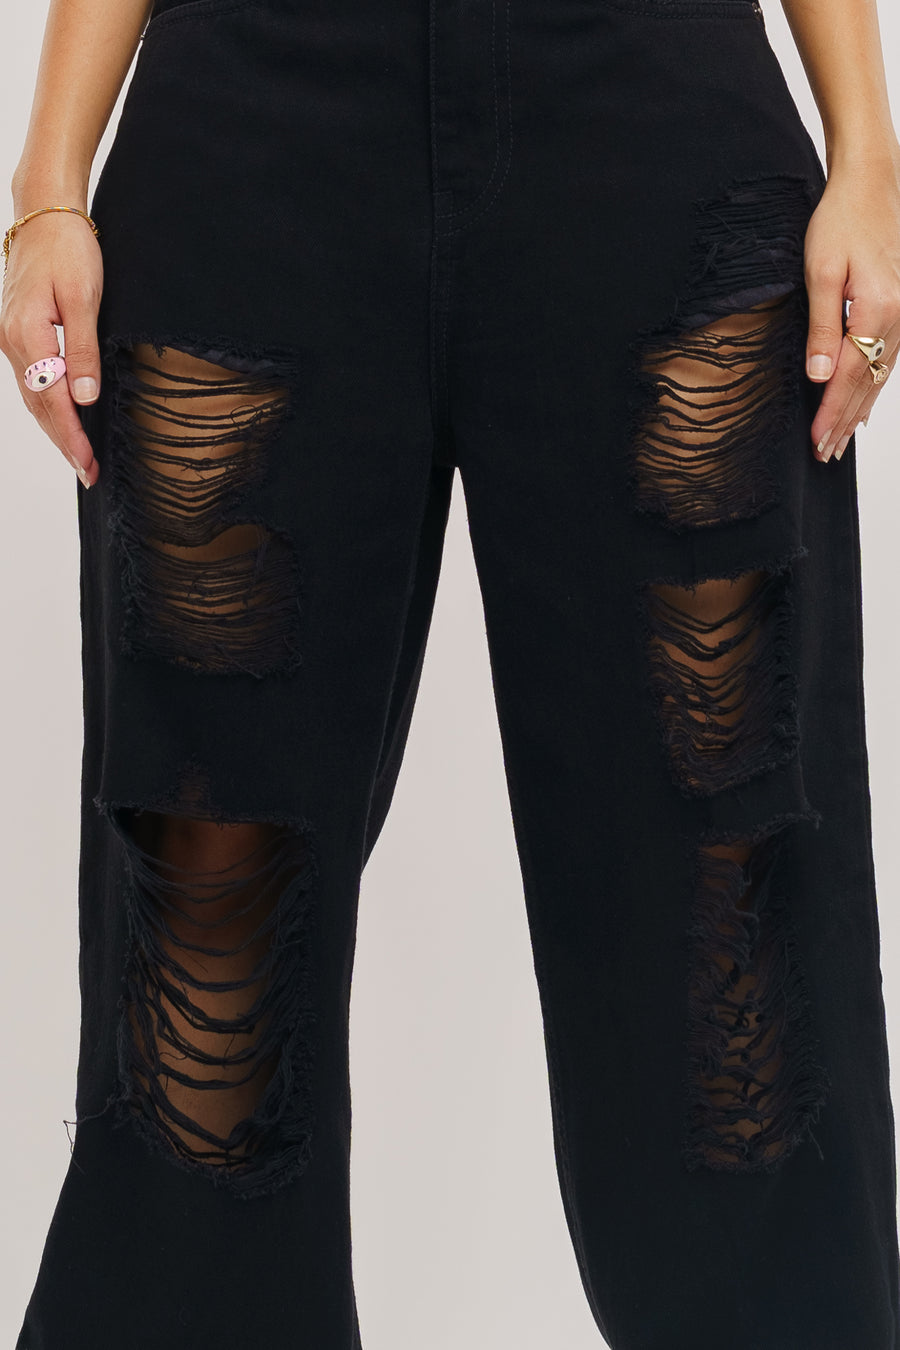 Buy Black Ripped Baggy Jeans For Women Online